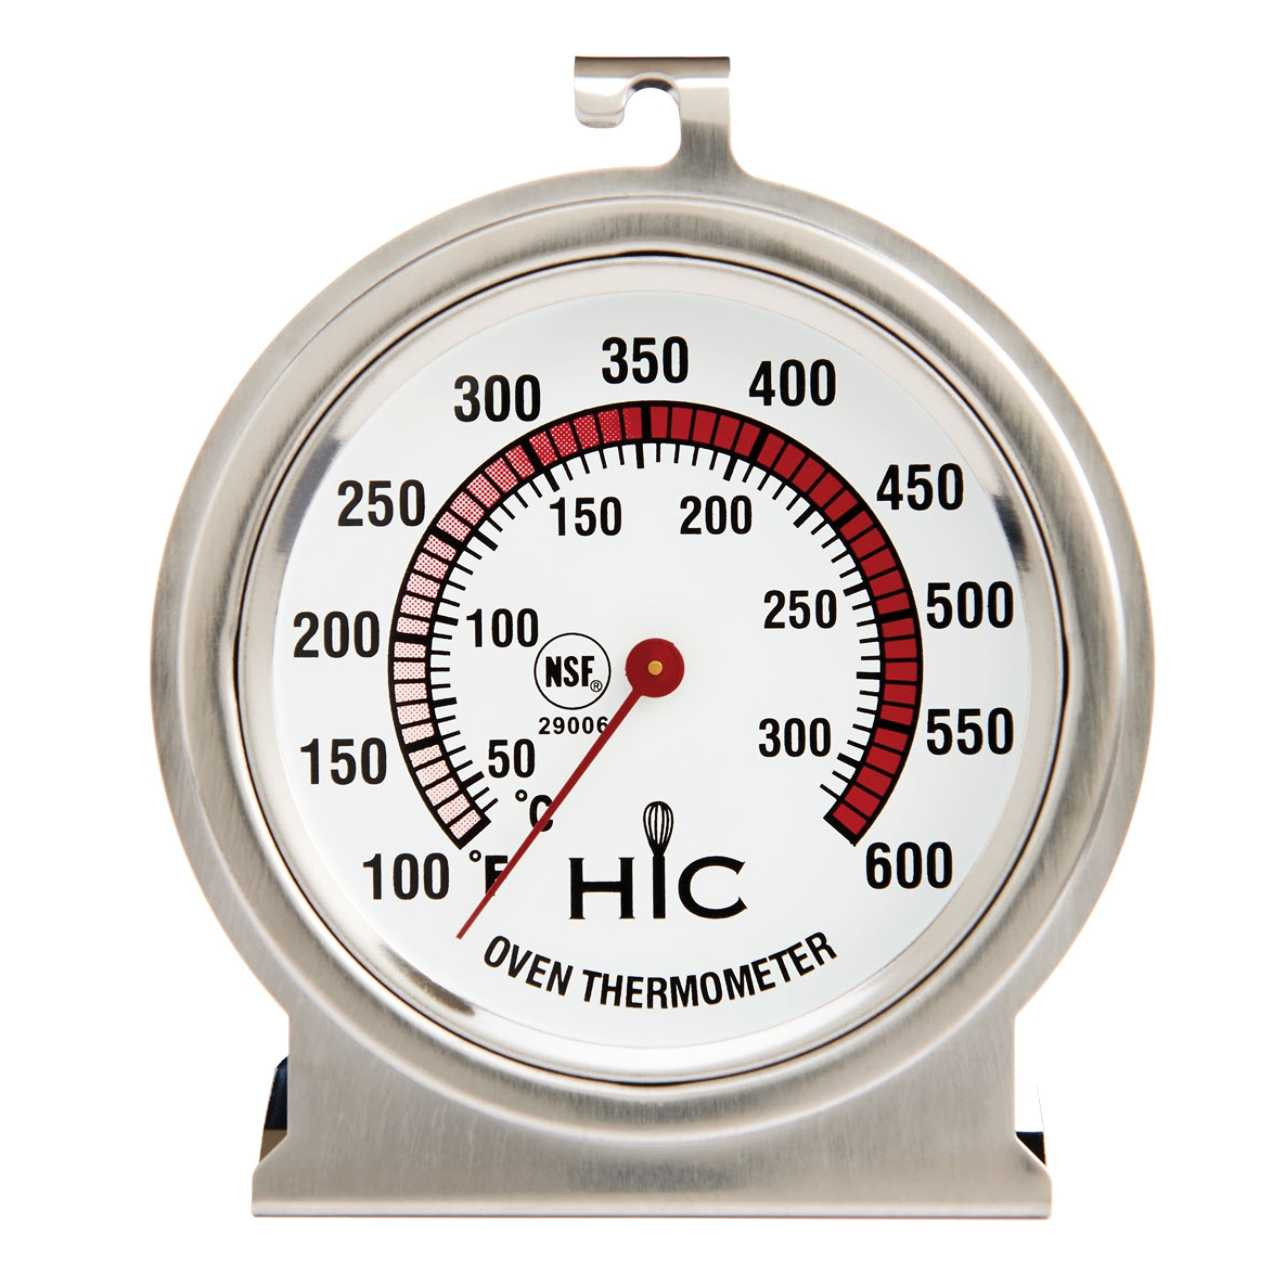 https://cdn11.bigcommerce.com/s-21kj3ntgv1/images/stencil/1280x1280/products/153/2960/HIC-Harold-Import-Company-Analog-Oven-Thermometer__98884.1680363543.jpg?c=2